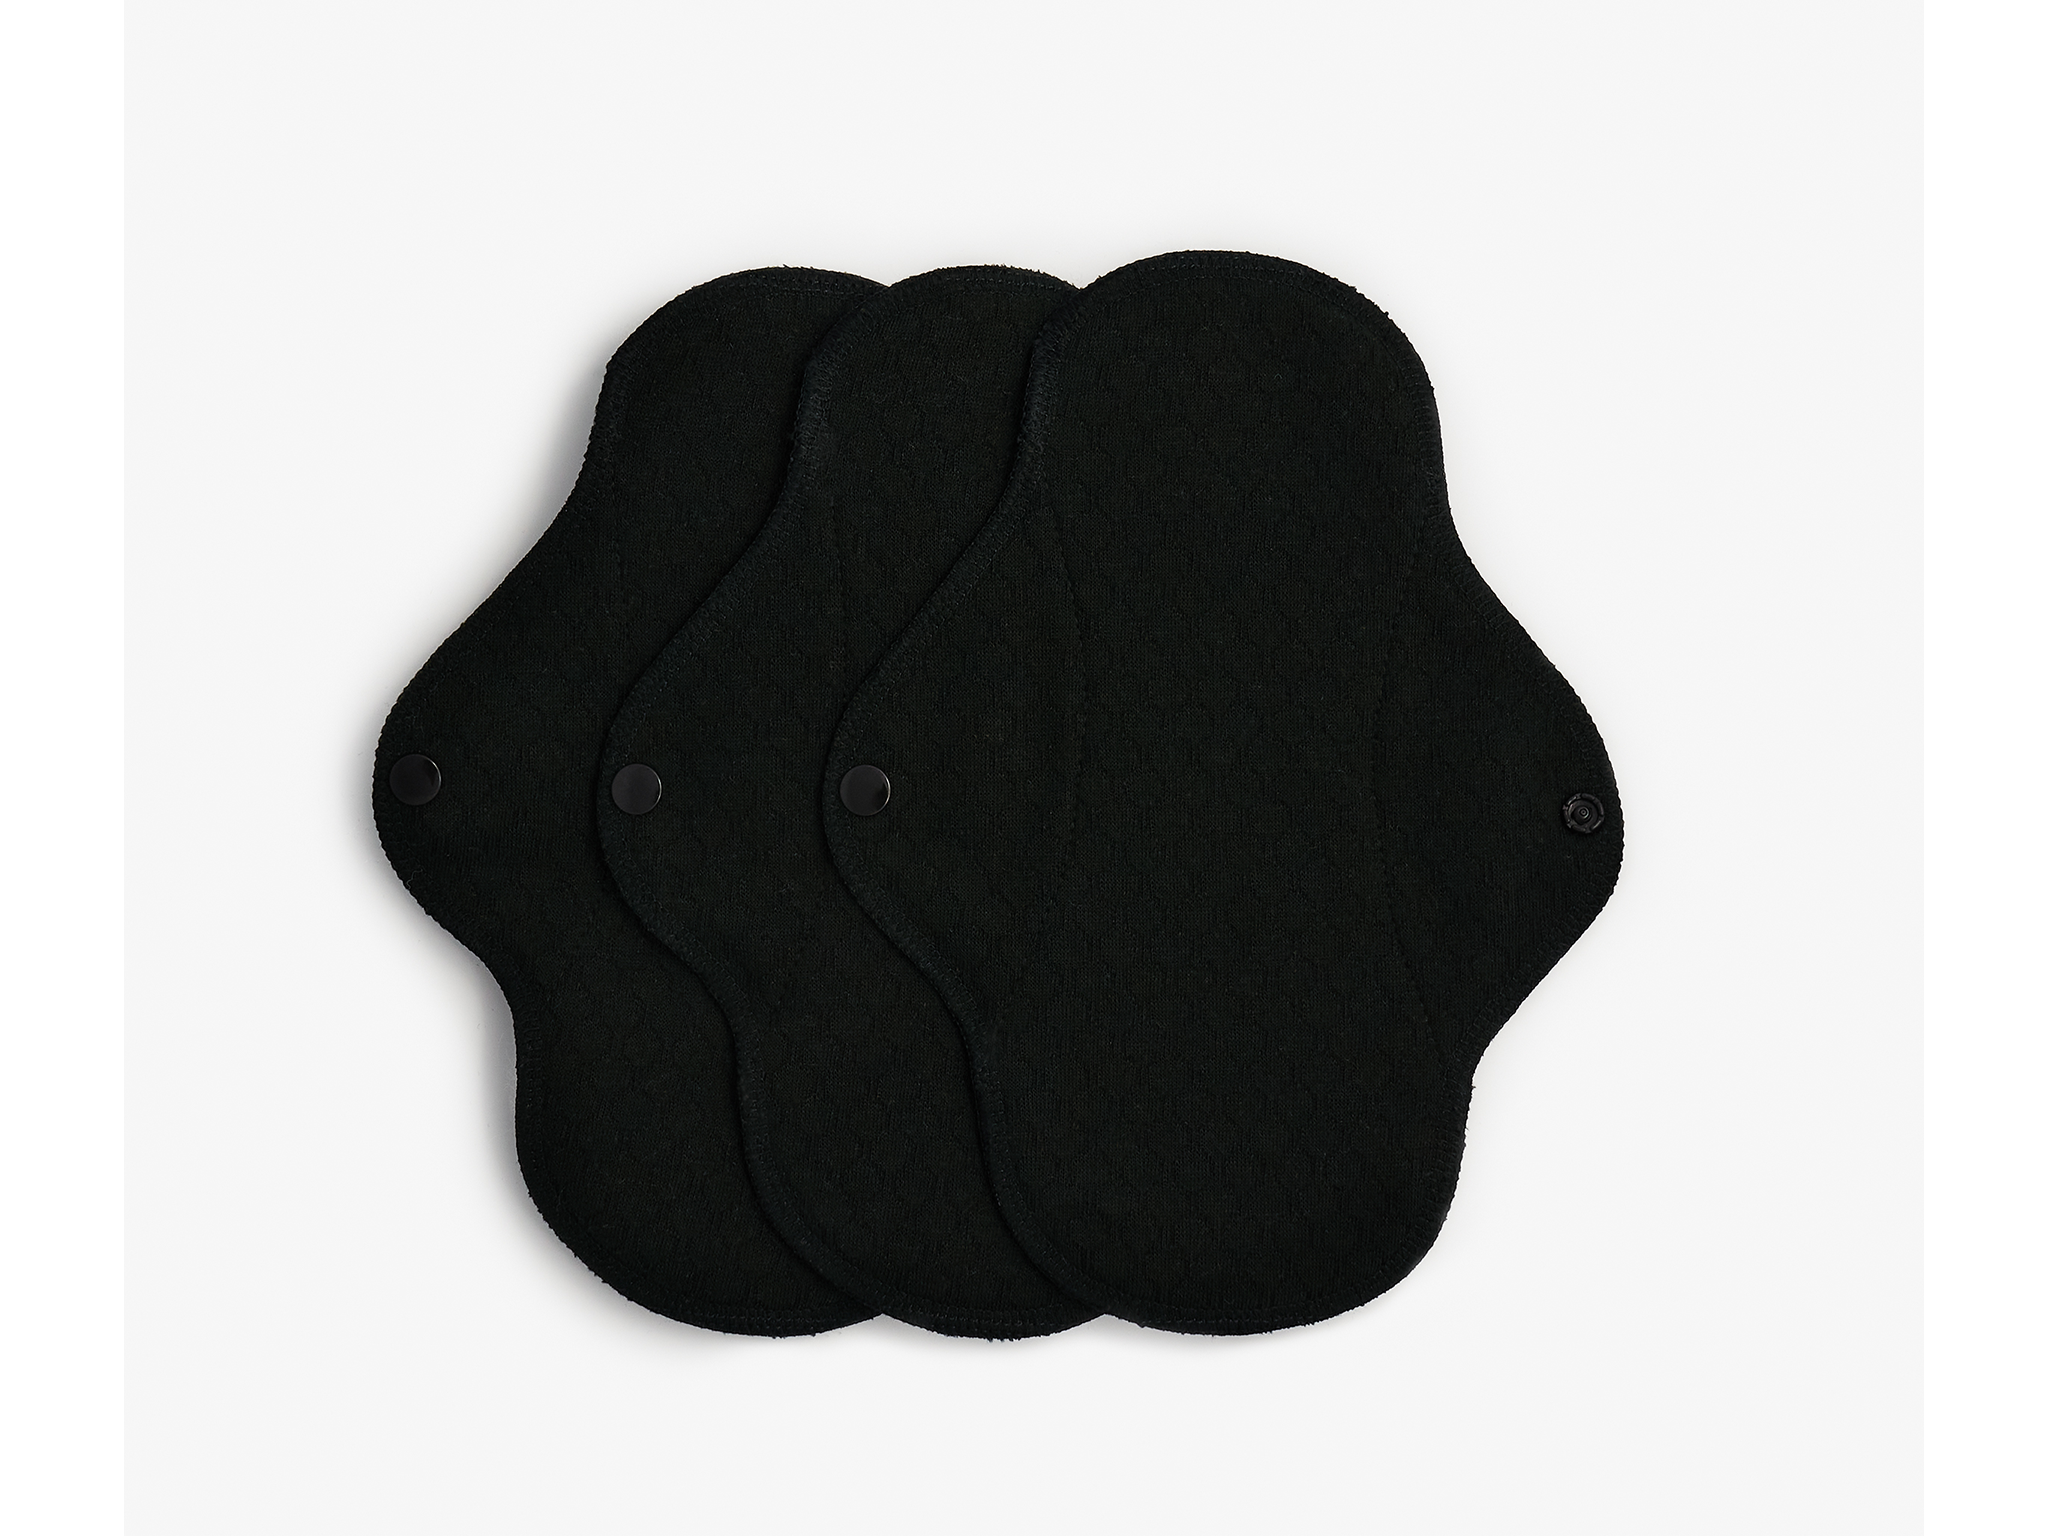 Imse small black workout period pads